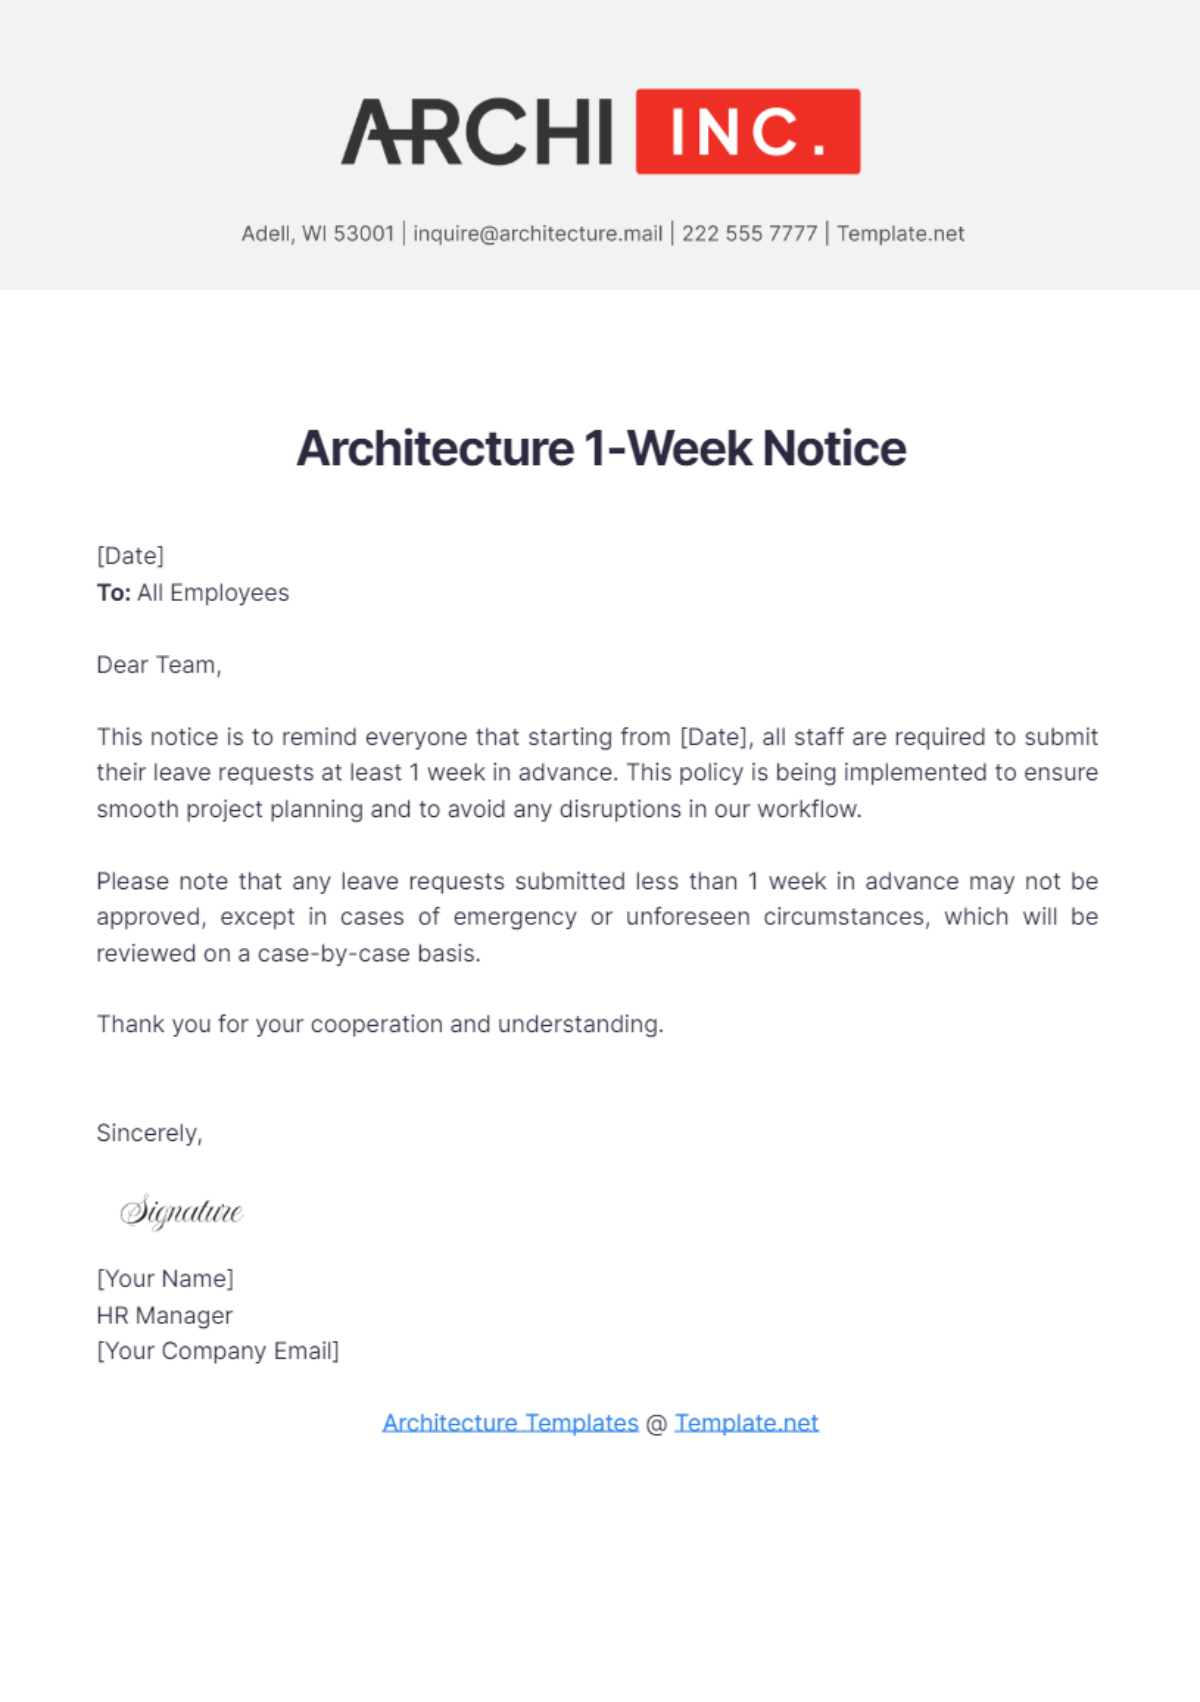 Free Architecture 1-Week Notice Template